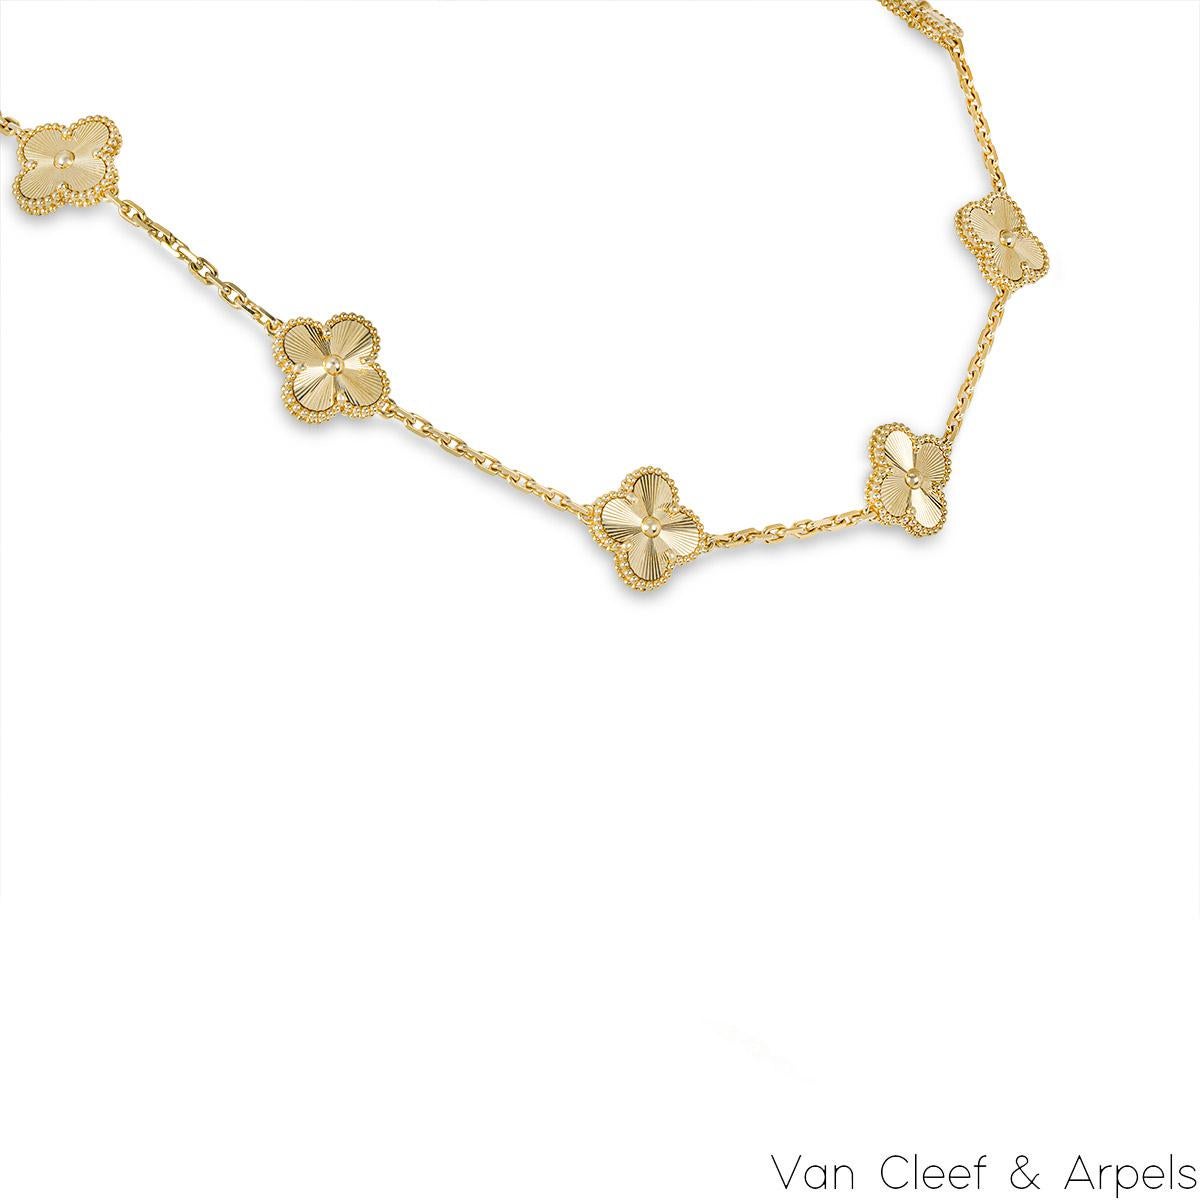 An elegant 18k yellow gold necklace by Van Cleef & Arpels from the Vintage Alhambra collection.  The necklace has 10 motifs, each set with a guilloche pattern and complemented by a beaded outer edge. The necklace measures 16.5 inches in length,